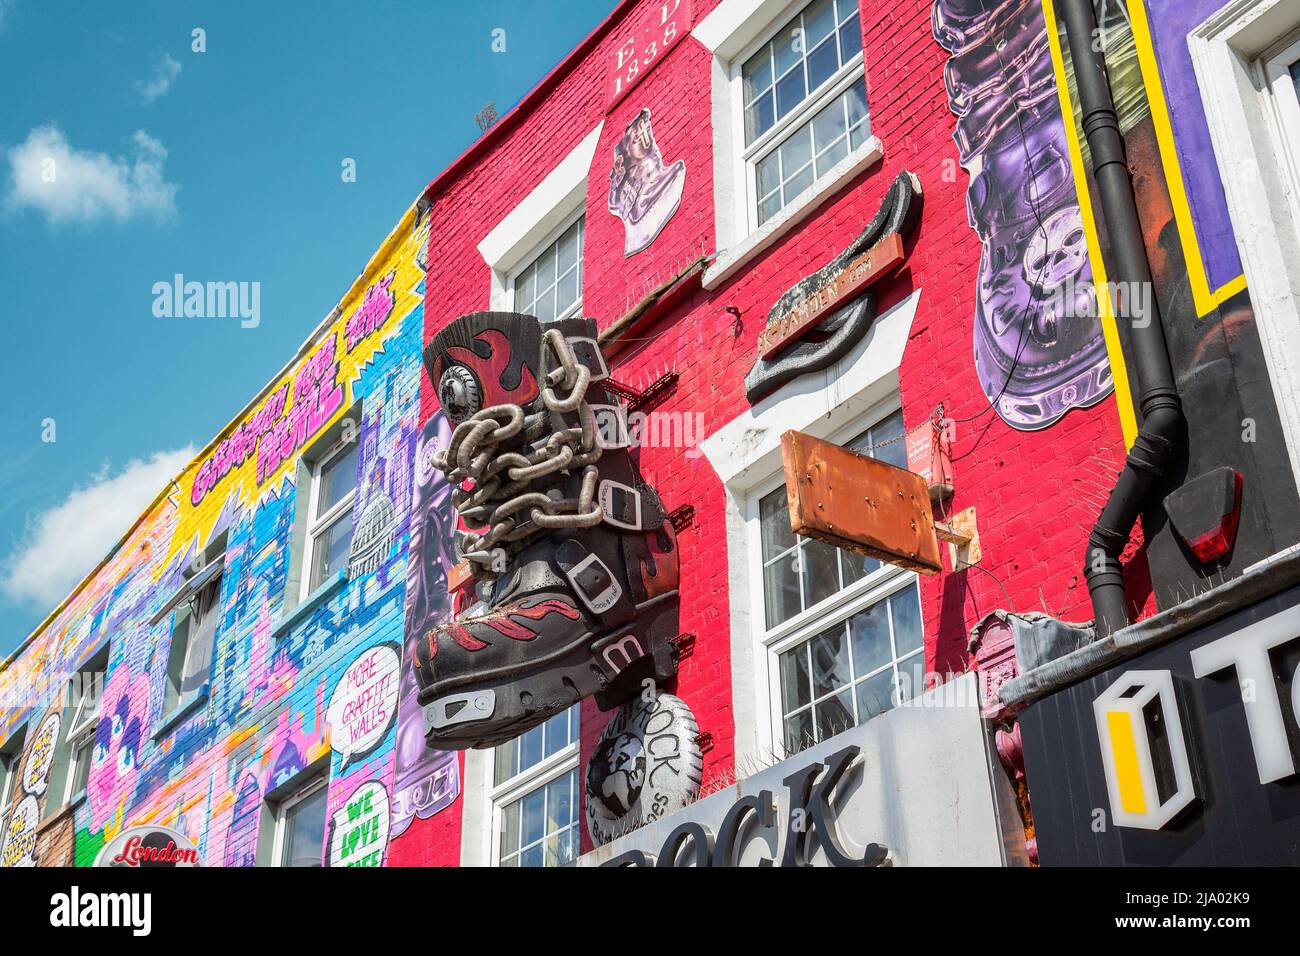 The New Rock shop iin Camden with its eye catching colourful exterior and giant ornate boot. Stock Photo